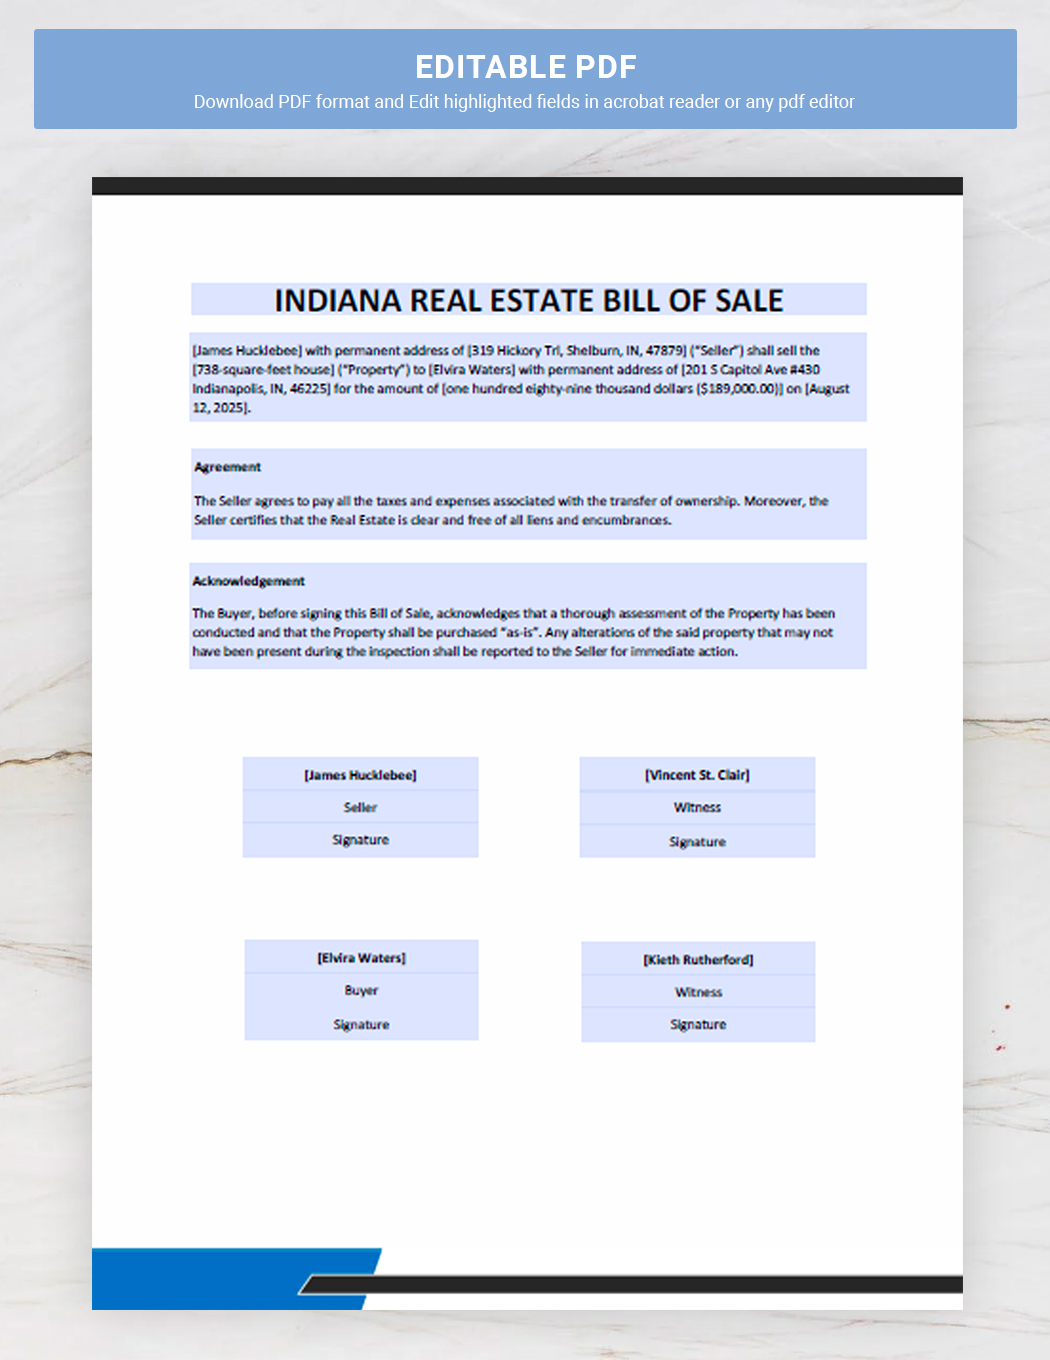 Indiana Real Estate Bill of Sale Template